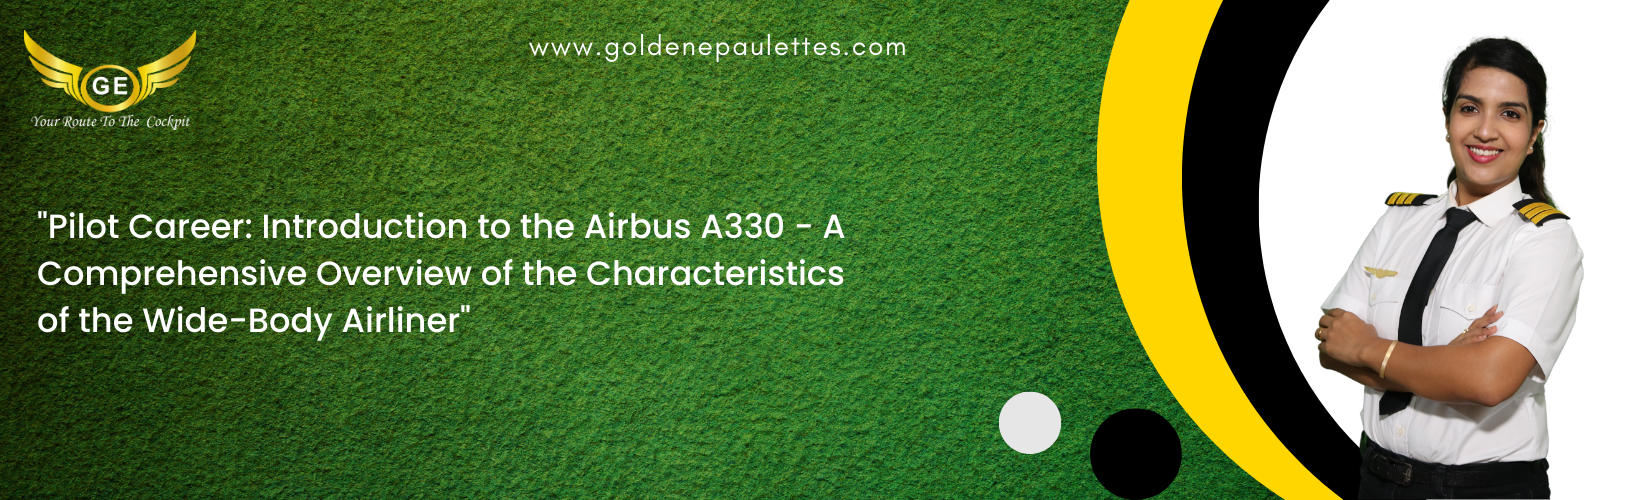 Introduction to the Airbus A330